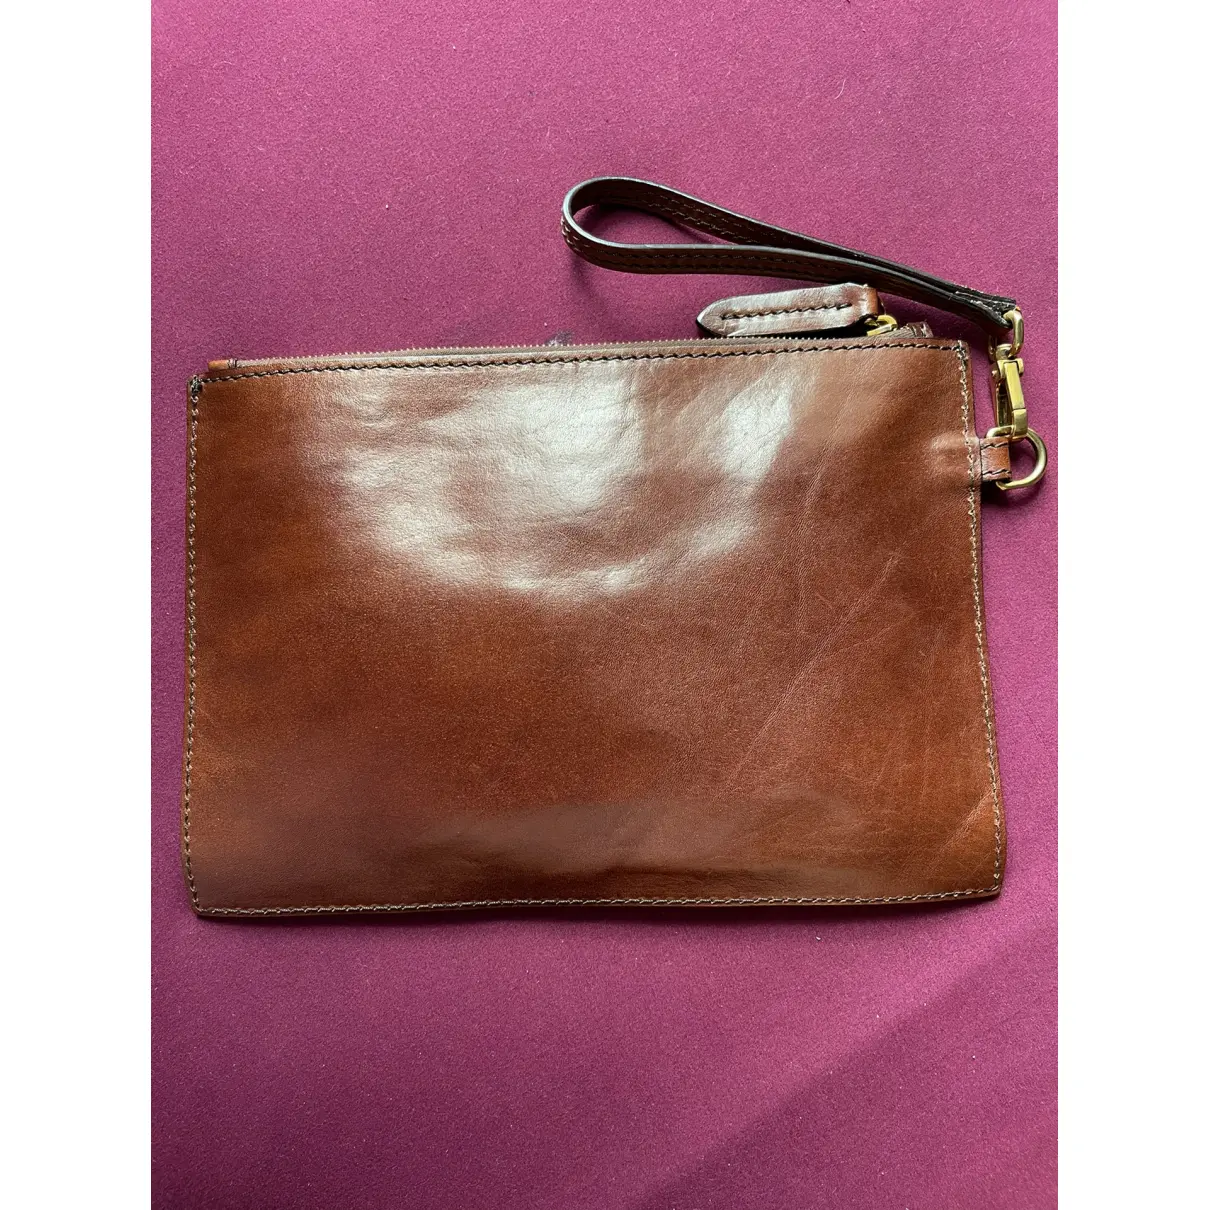 Buy THE BRIDGE Leather small bag online